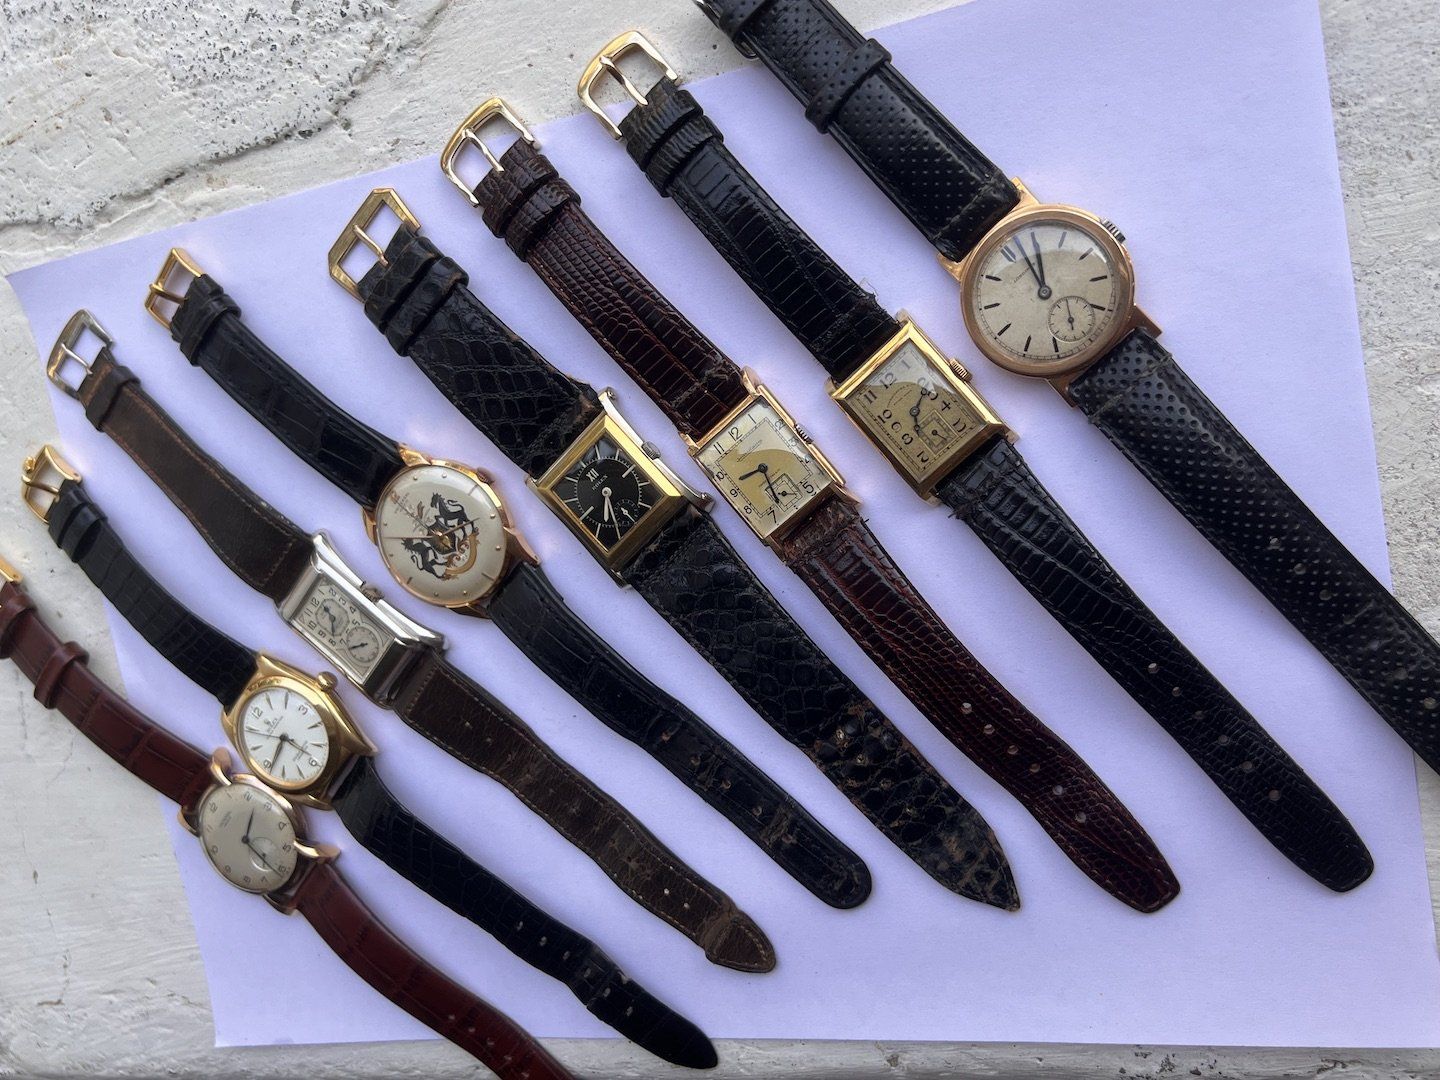 Personal watch collection including Jaeger-LeCoultre Reverso For Favre Leuba & Co